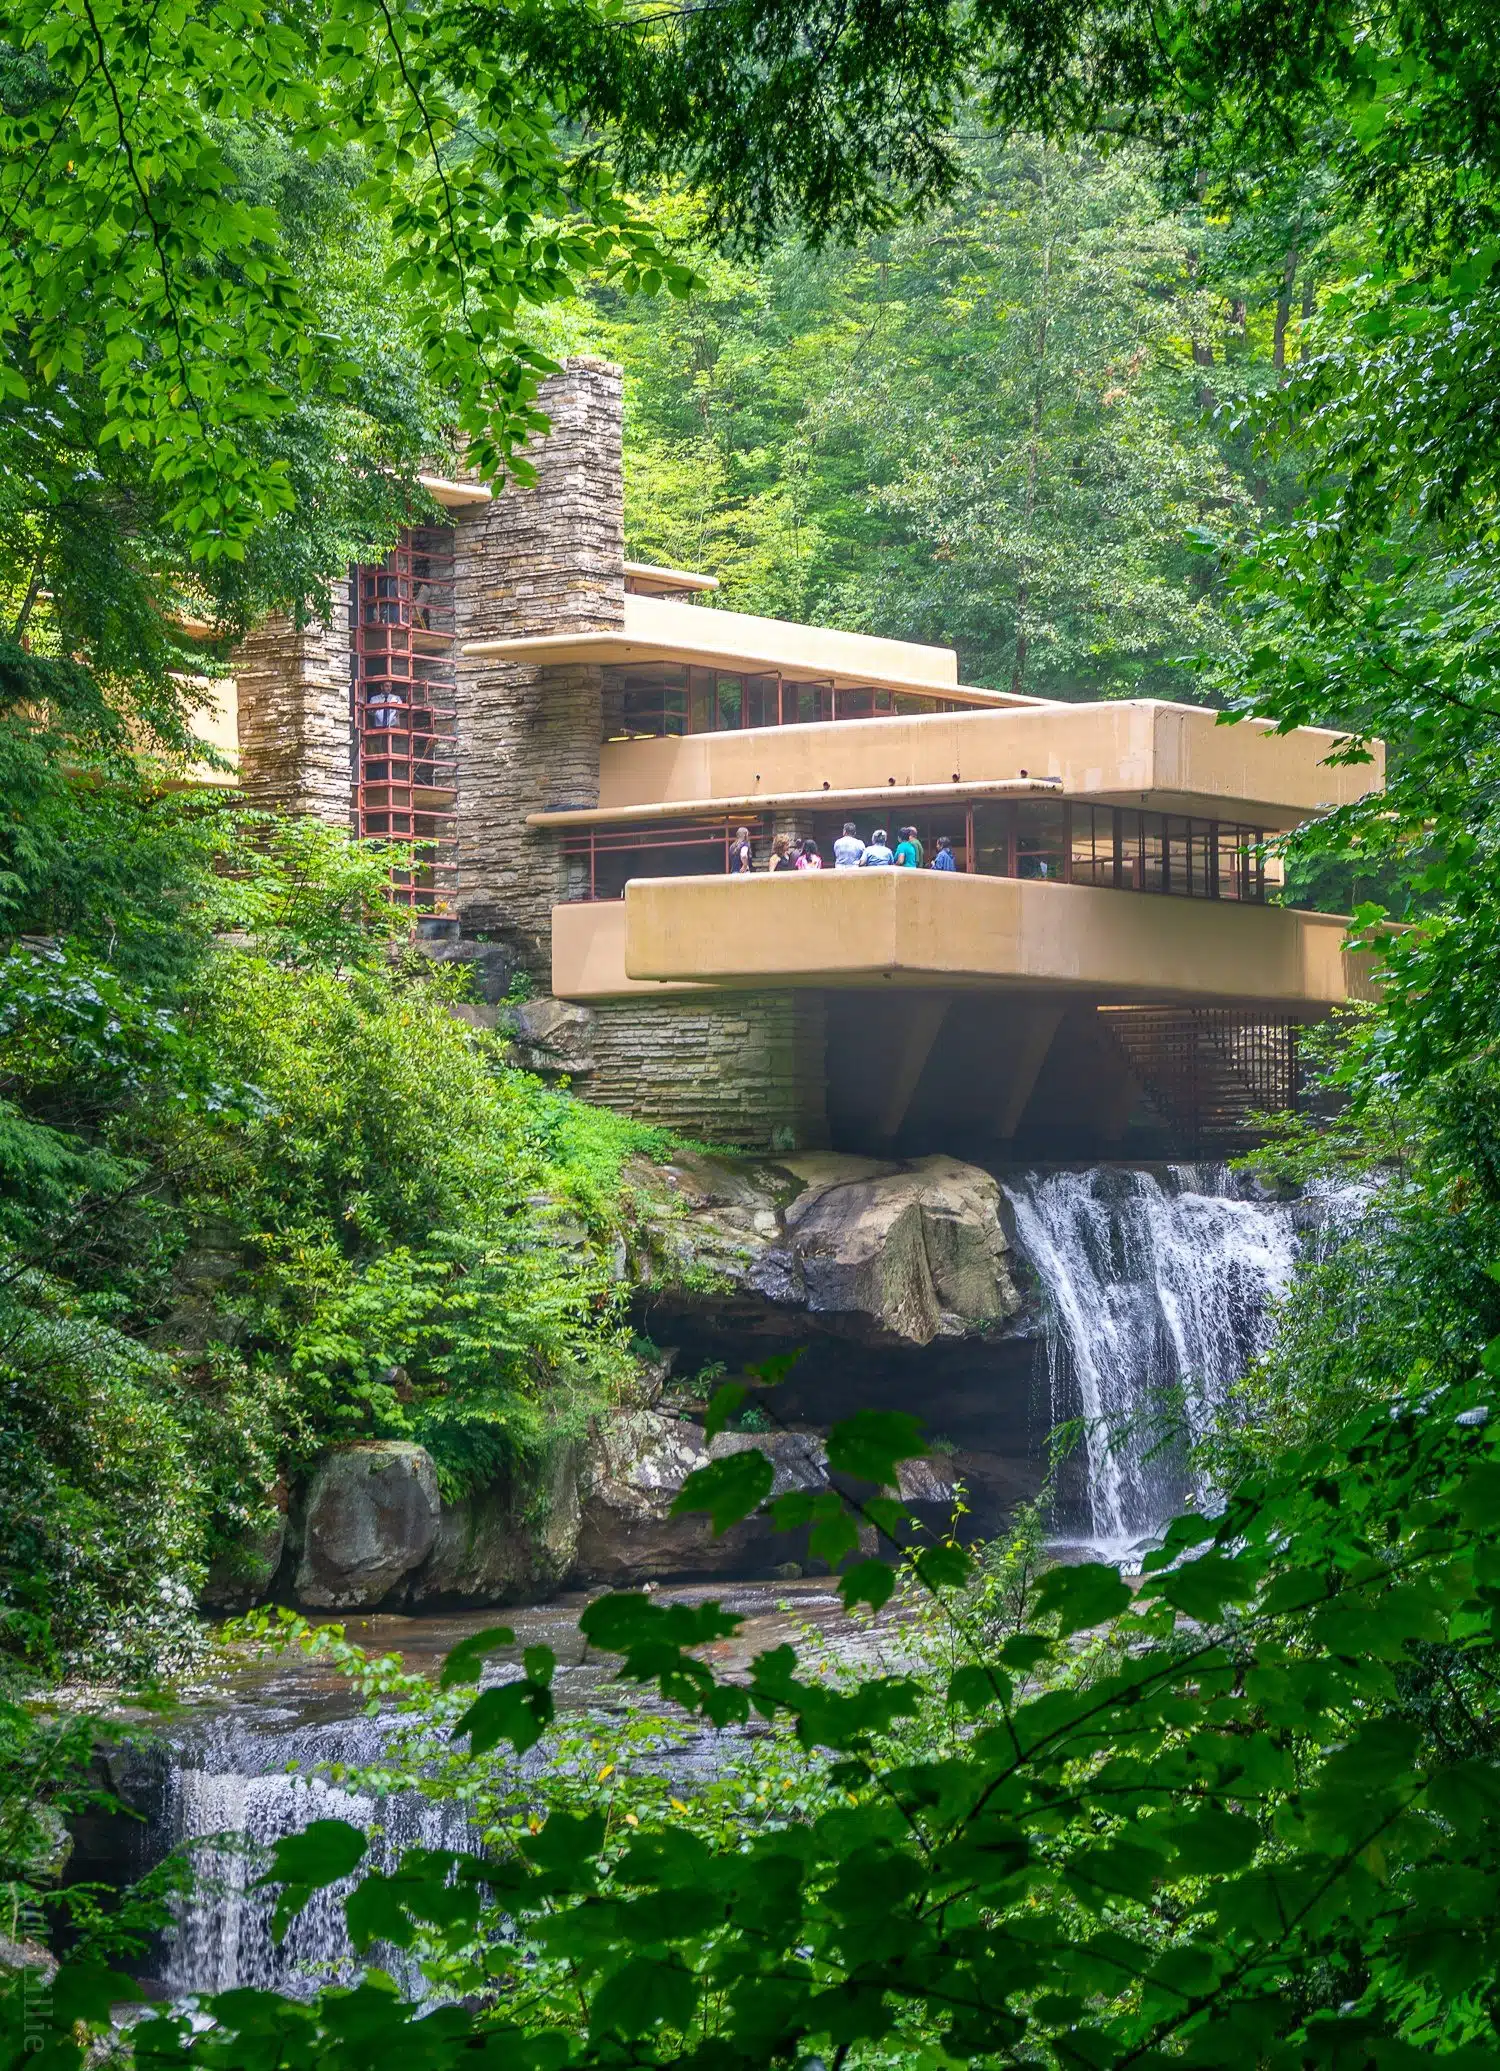 Frank Lloyd Wright's Fallingwater, famous house for architecture, is a great attraction near Pittsburgh, PA in the Laurel Highlands, even in "falling water"!